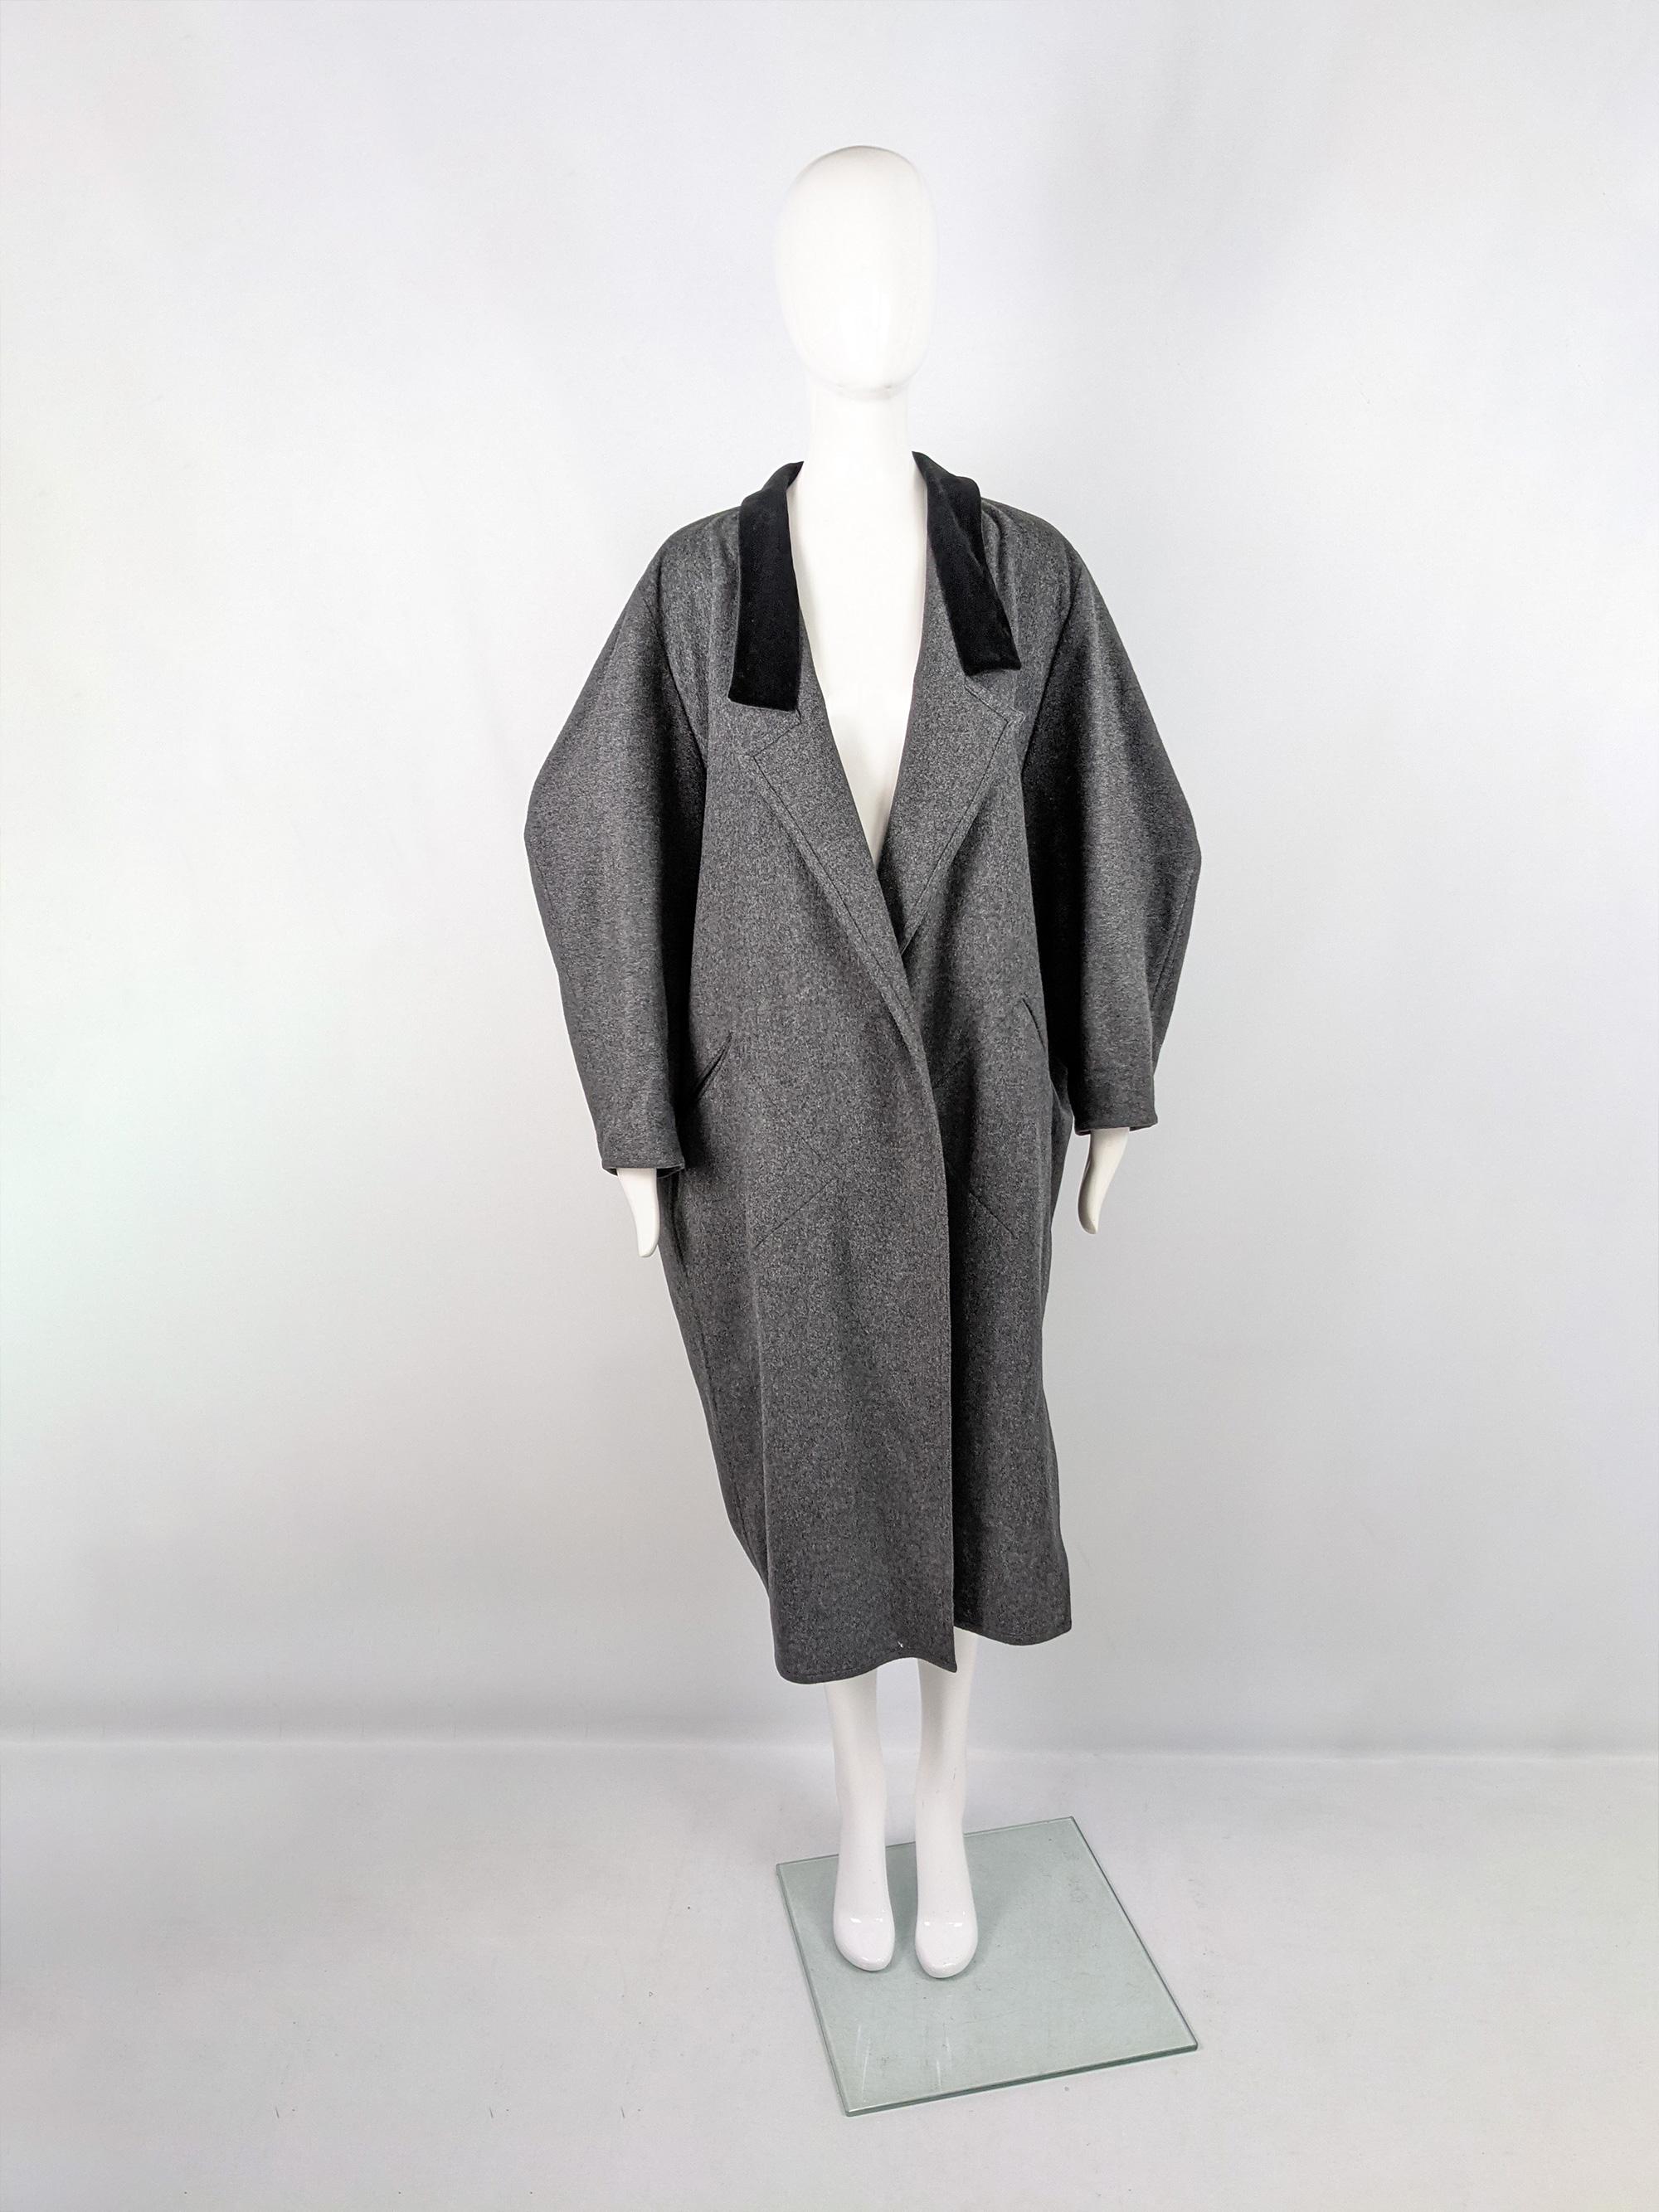 An incredible vintage coat from the 80s by iconic Italian born fashion designer, Angelo Tarlazzi. In a grey wool with a black velvet collar and a sculptural, architectural cocoon cut that is wider at the top and tapers in at the hem. The sleeves